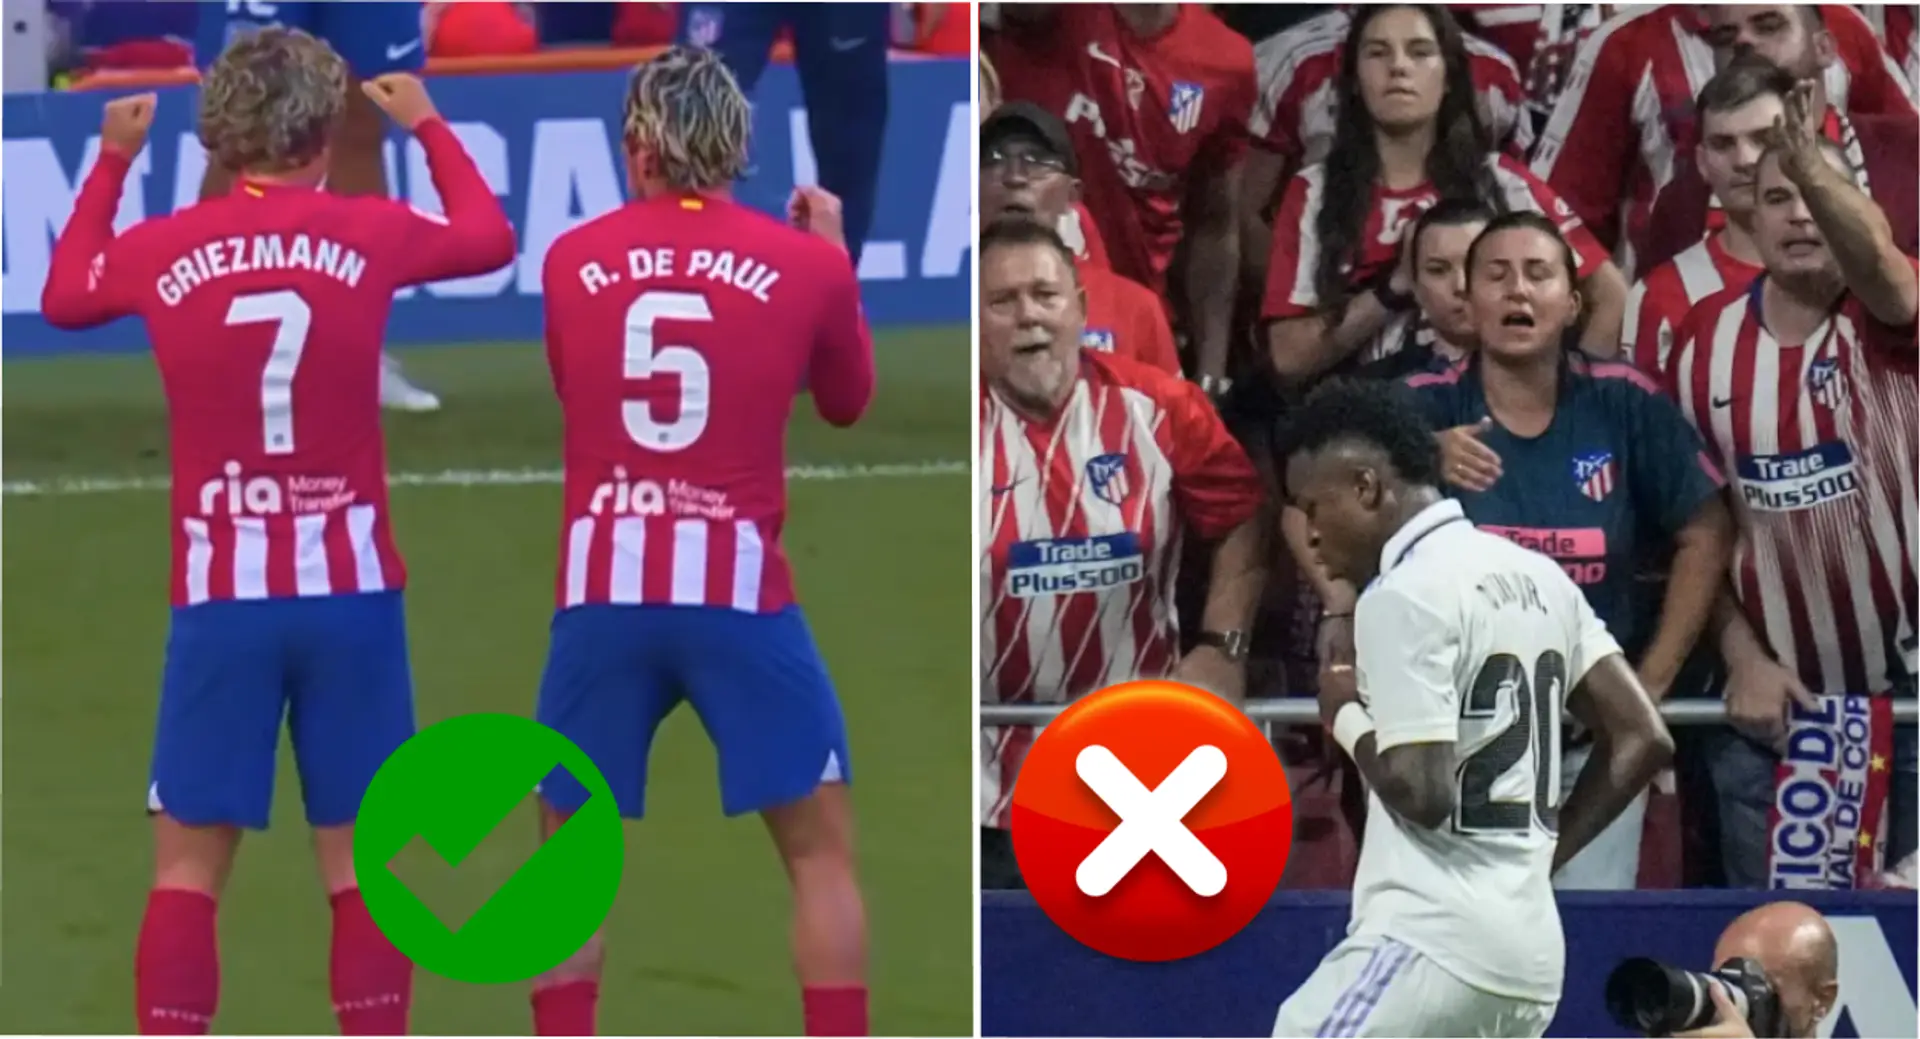 'But when Vinicius does it, he's a provocateur': Madridistas on Atletico players dancing to celebrate Girona win